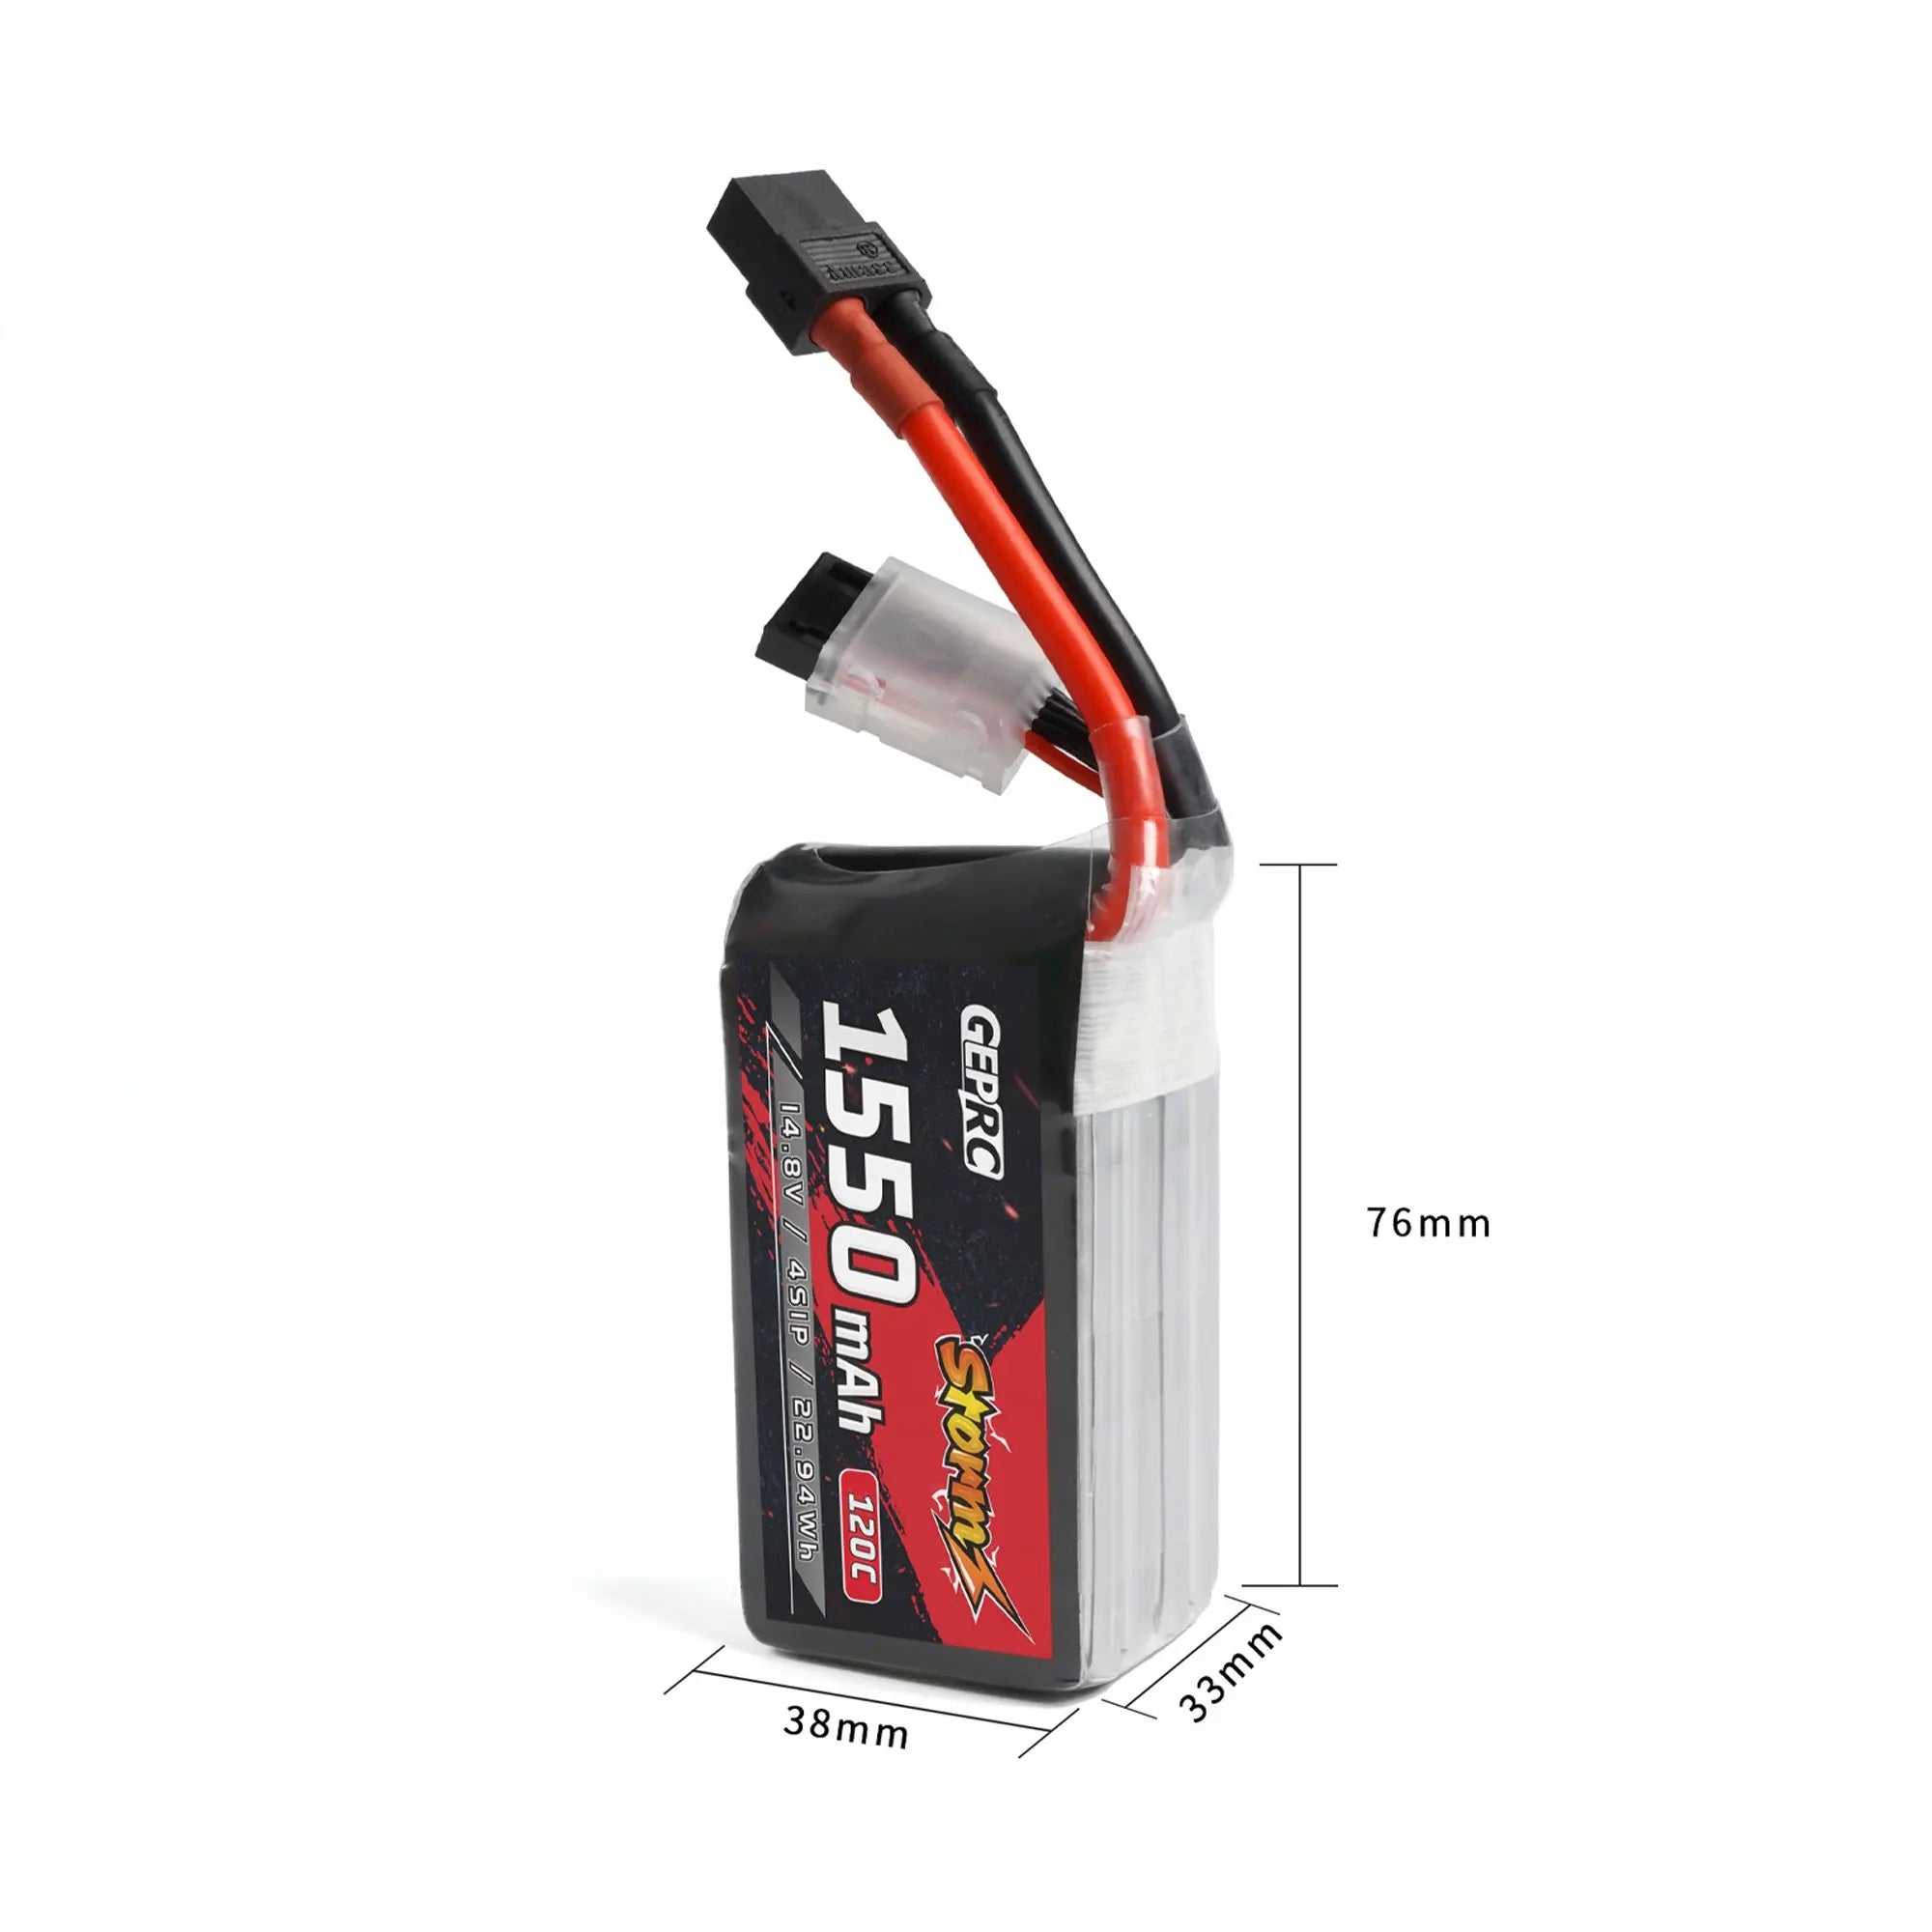 GEPRC Storm 4S 1550mAh 120C Lipo Battery, the charging rate supports up to 3C, and it is recommended to use 1-1.5C 